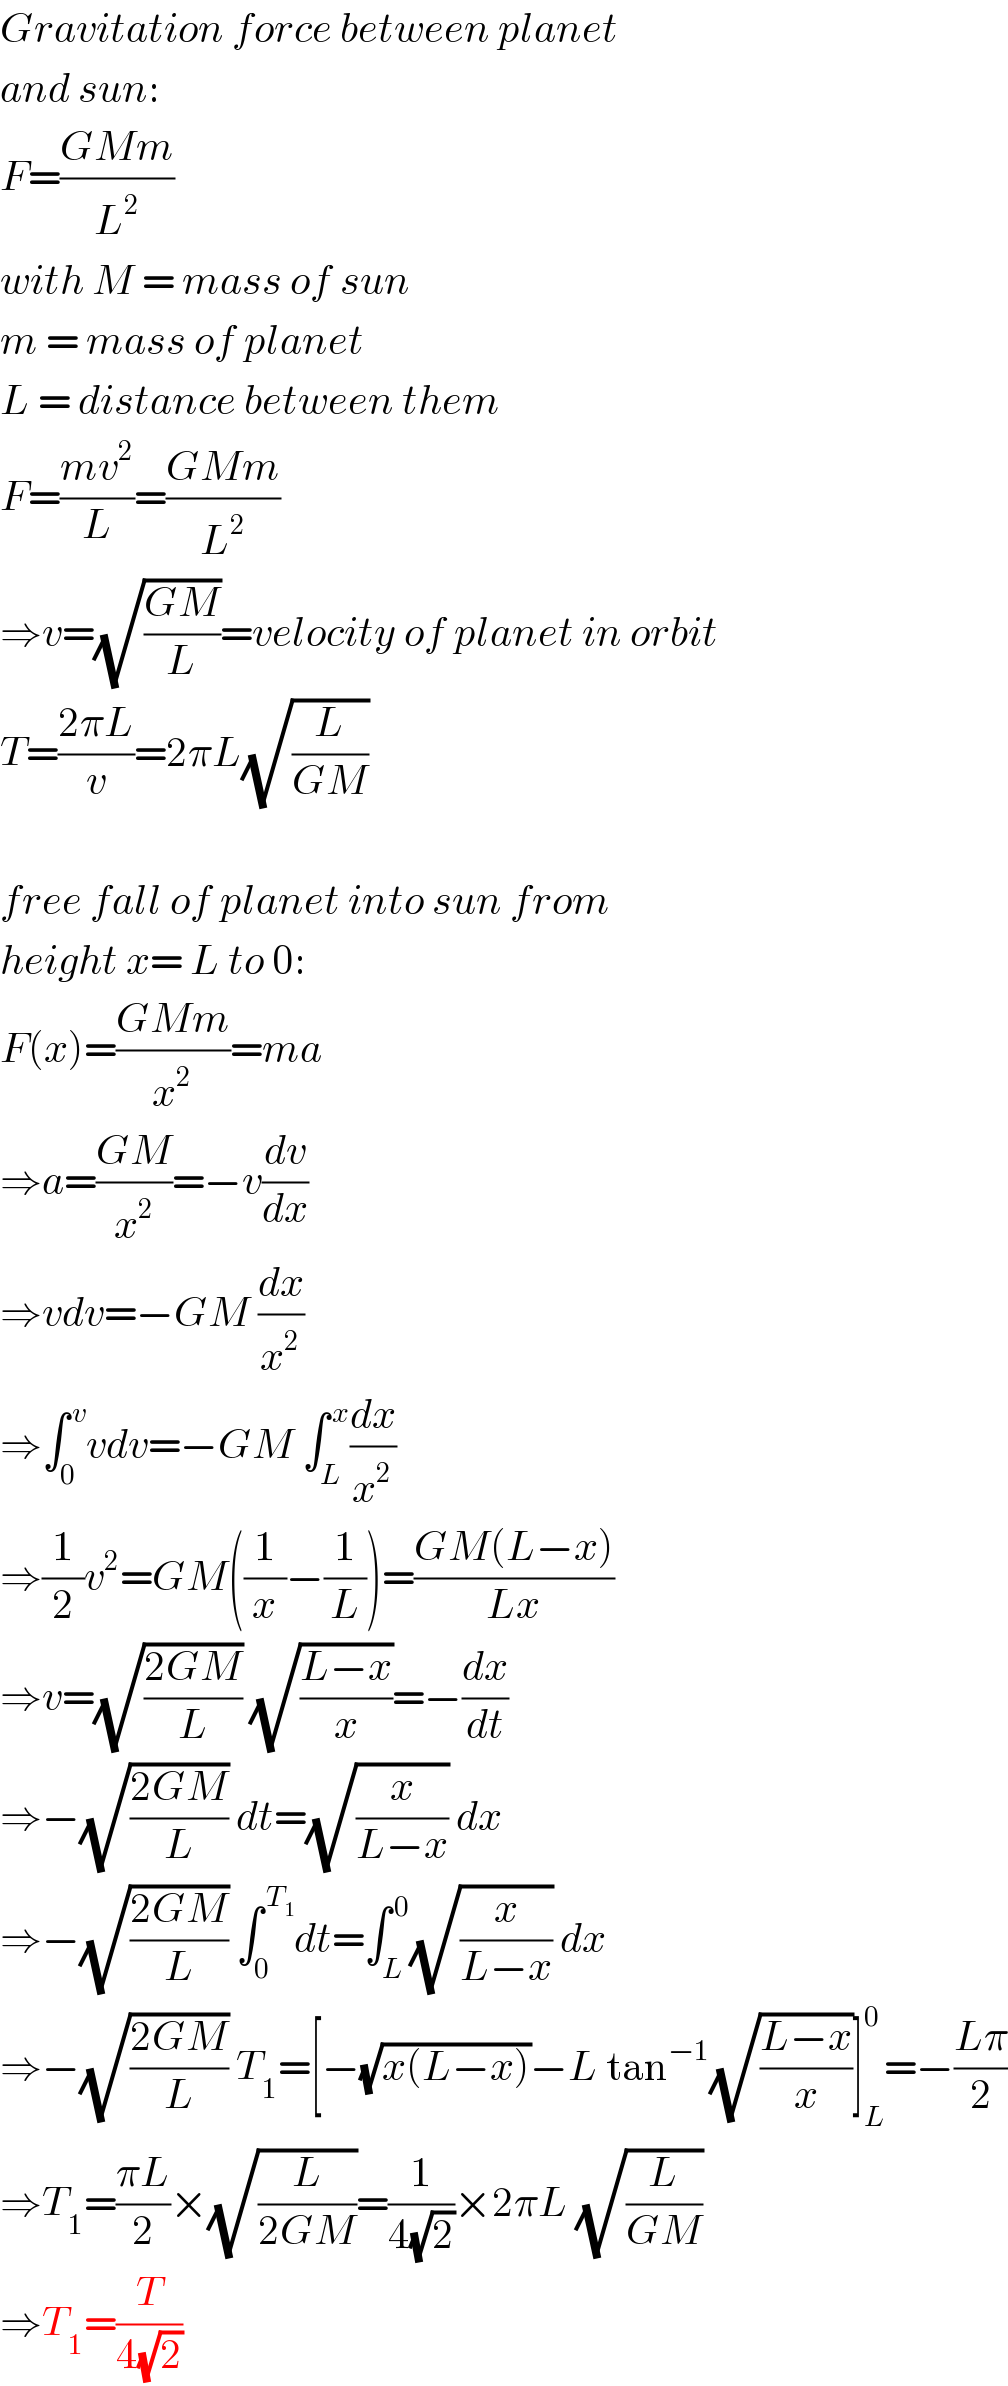 Gravitation force between planet  and sun:  F=((GMm)/L^2 )  with M = mass of sun  m = mass of planet  L = distance between them  F=((mv^2 )/L)=((GMm)/L^2 )  ⇒v=(√((GM)/L))=velocity of planet in orbit  T=((2πL)/v)=2πL(√(L/(GM)))    free fall of planet into sun from  height x= L to 0:  F(x)=((GMm)/x^2 )=ma  ⇒a=((GM)/x^2 )=−v(dv/dx)  ⇒vdv=−GM (dx/x^2 )  ⇒∫_0 ^( v) vdv=−GM ∫_L ^( x) (dx/x^2 )  ⇒(1/2)v^2 =GM((1/x)−(1/L))=((GM(L−x))/(Lx))  ⇒v=(√((2GM)/L)) (√((L−x)/x))=−(dx/dt)  ⇒−(√((2GM)/L)) dt=(√(x/(L−x))) dx  ⇒−(√((2GM)/L)) ∫_0 ^( T_1 ) dt=∫_L ^( 0) (√(x/(L−x))) dx  ⇒−(√((2GM)/L)) T_1 =[−(√(x(L−x)))−L tan^(−1) (√((L−x)/x))]_L ^0 =−((Lπ)/2)  ⇒T_1 =((πL)/2)×(√(L/(2GM)))=(1/(4(√2)))×2πL (√(L/(GM)))  ⇒T_1 =(T/(4(√2)))  